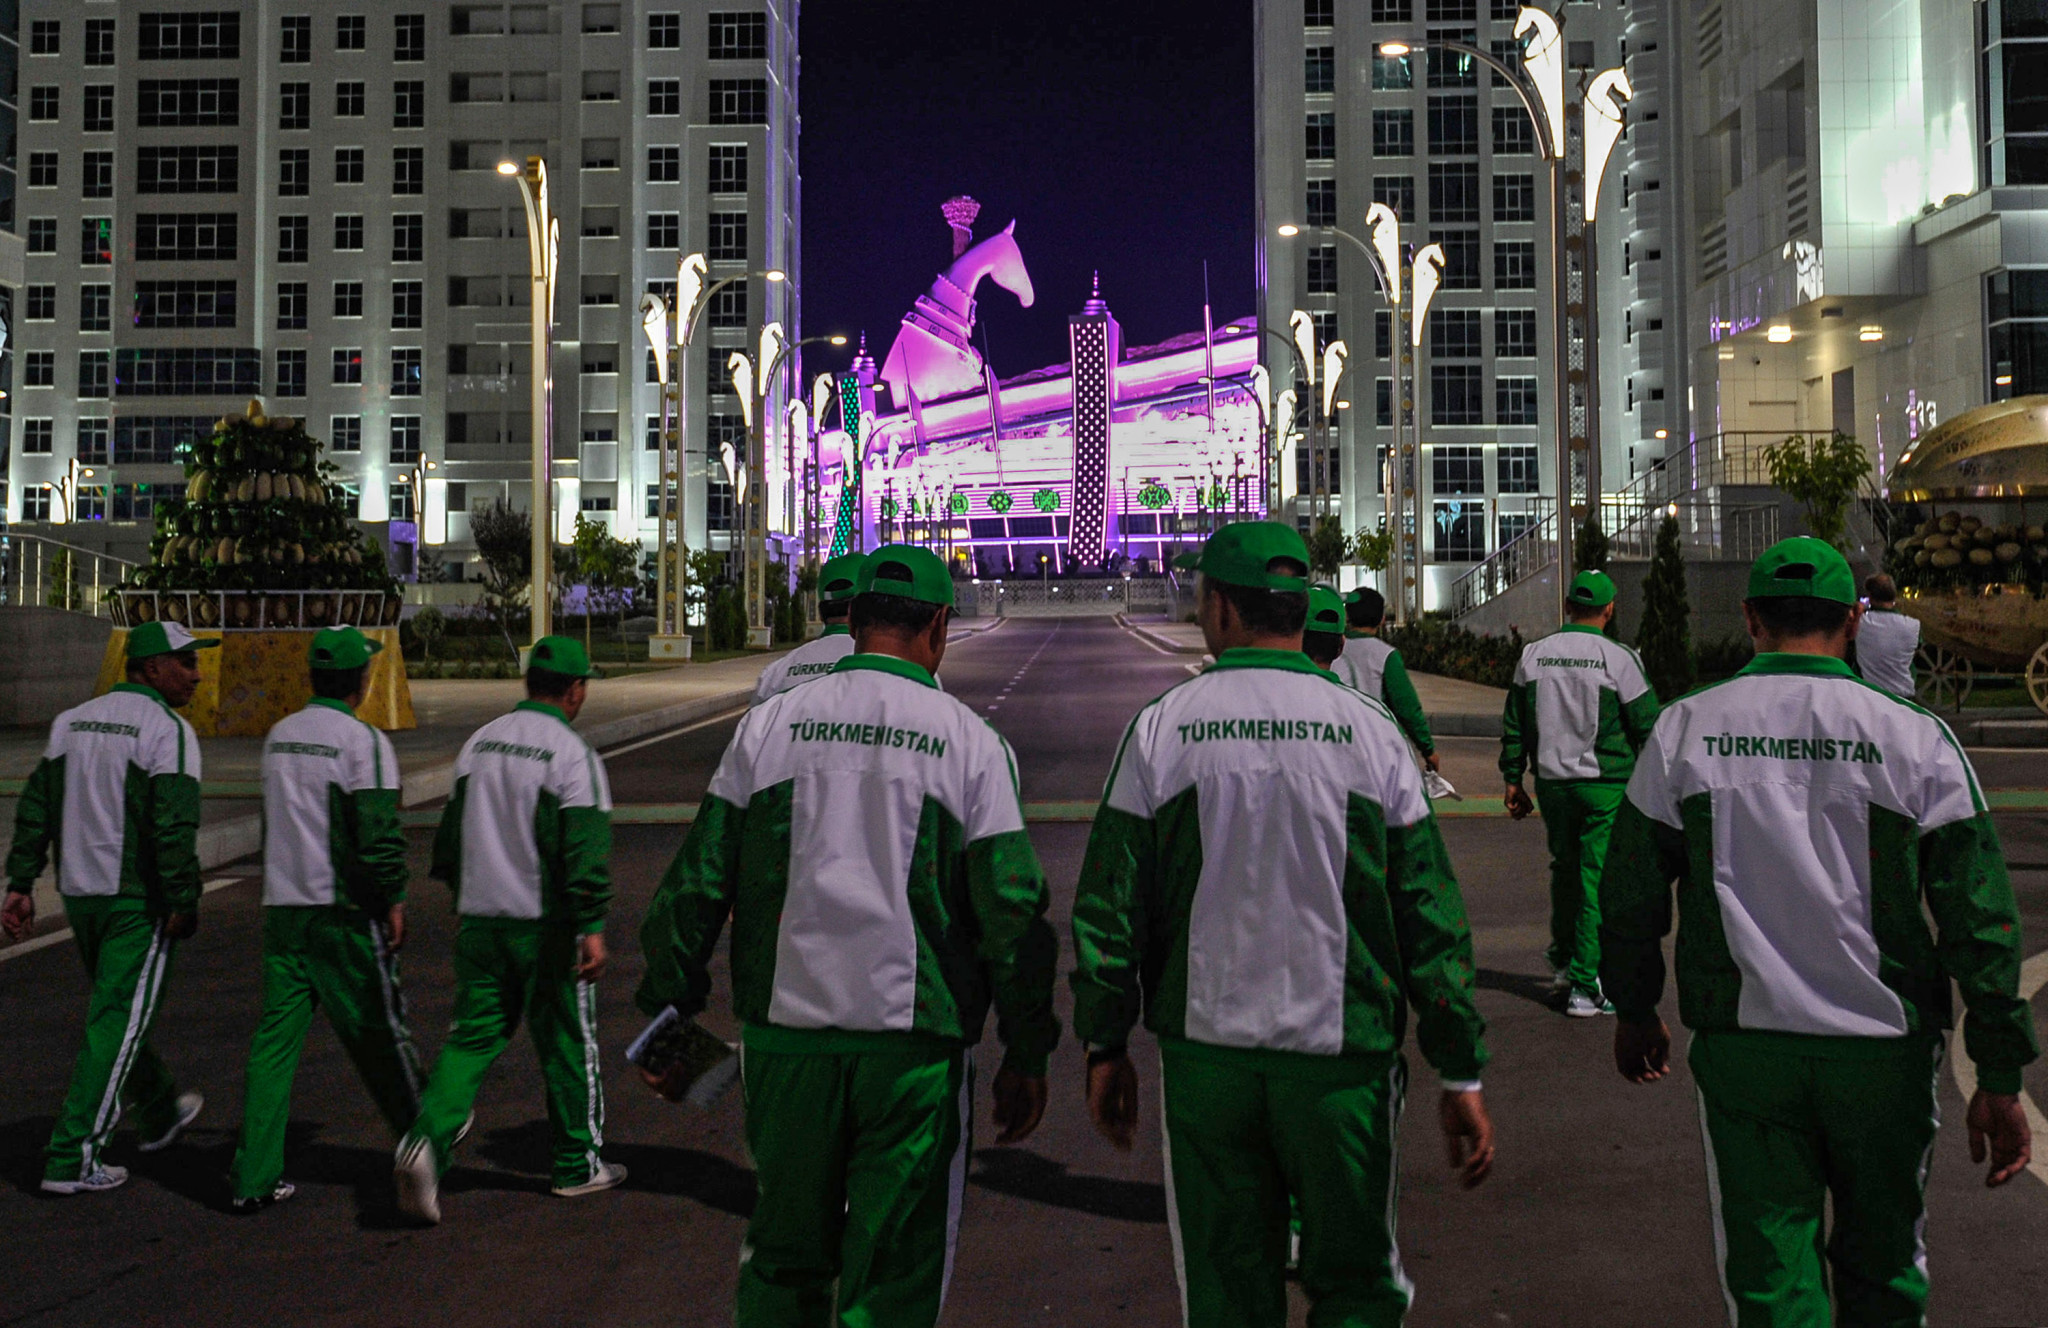 Turkmenistan is gearing up to host the biggest event in the country's history ©Getty Images